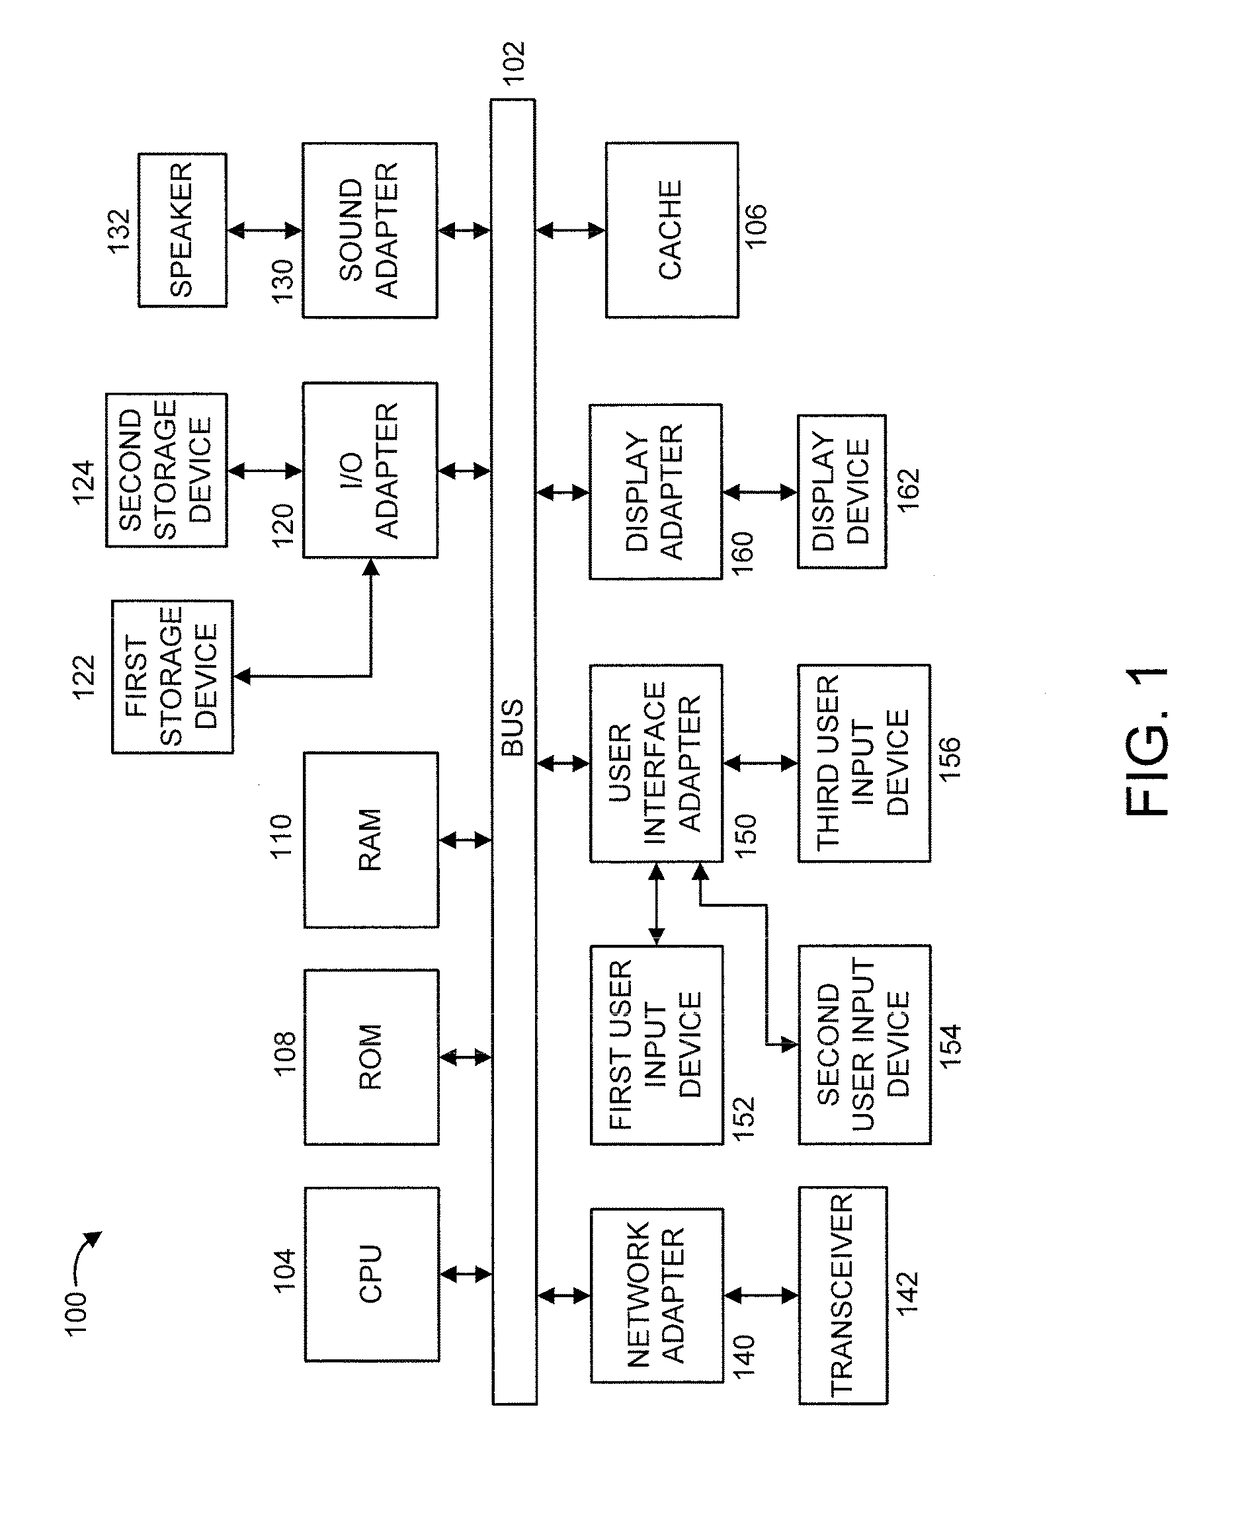 Work schedule creation based on predicted and detected temporal and event based individual risk to maintain cumulative workplace risk below a threshold